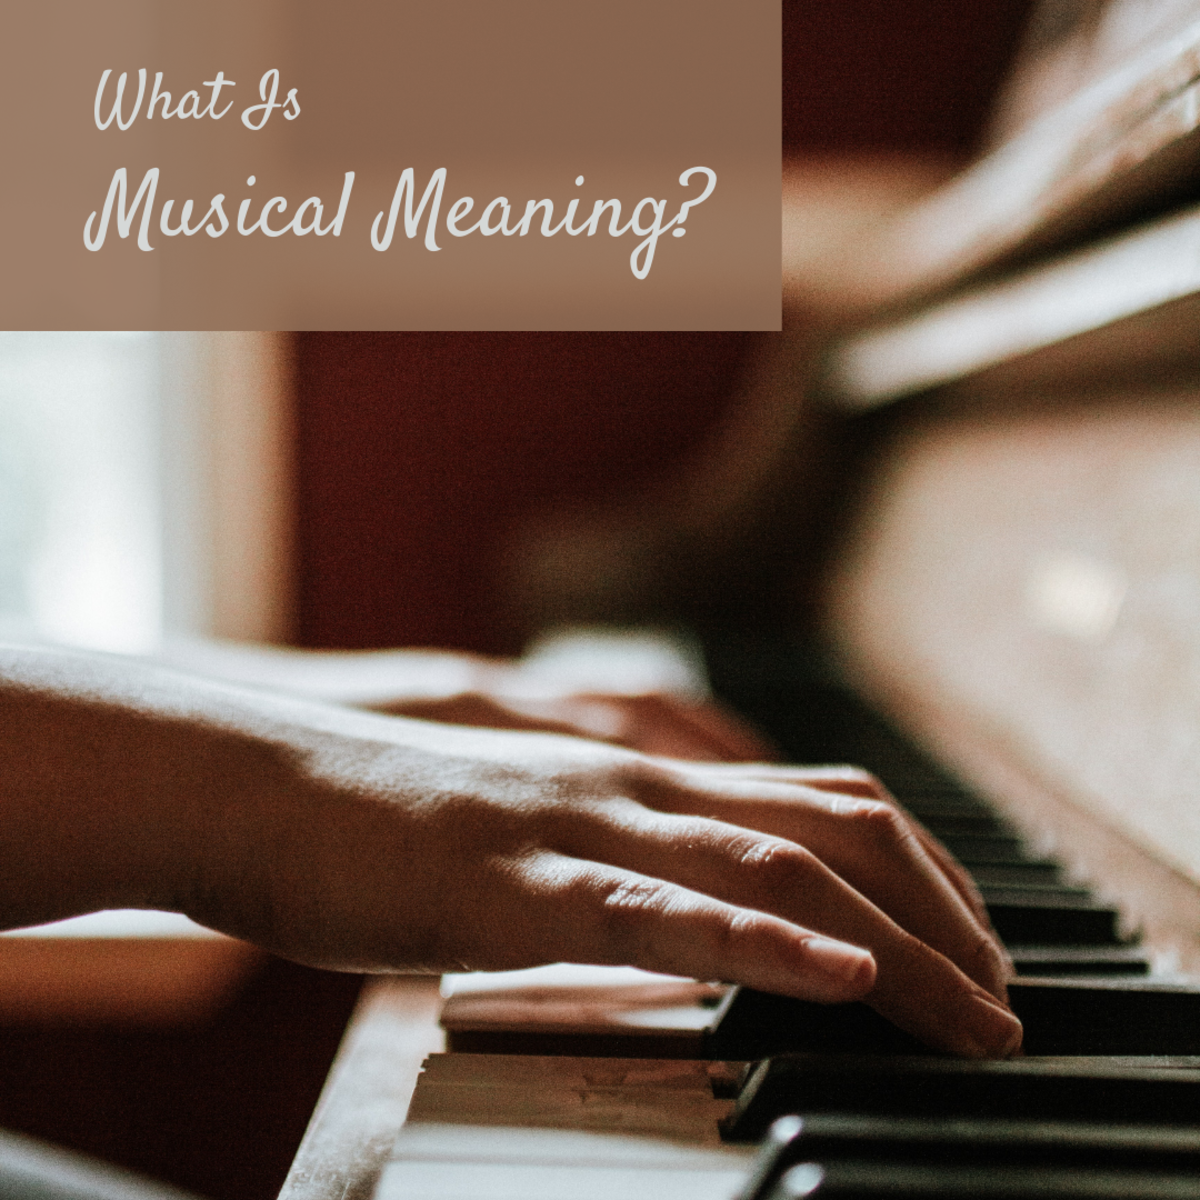 Understanding Music and Musical Meaning